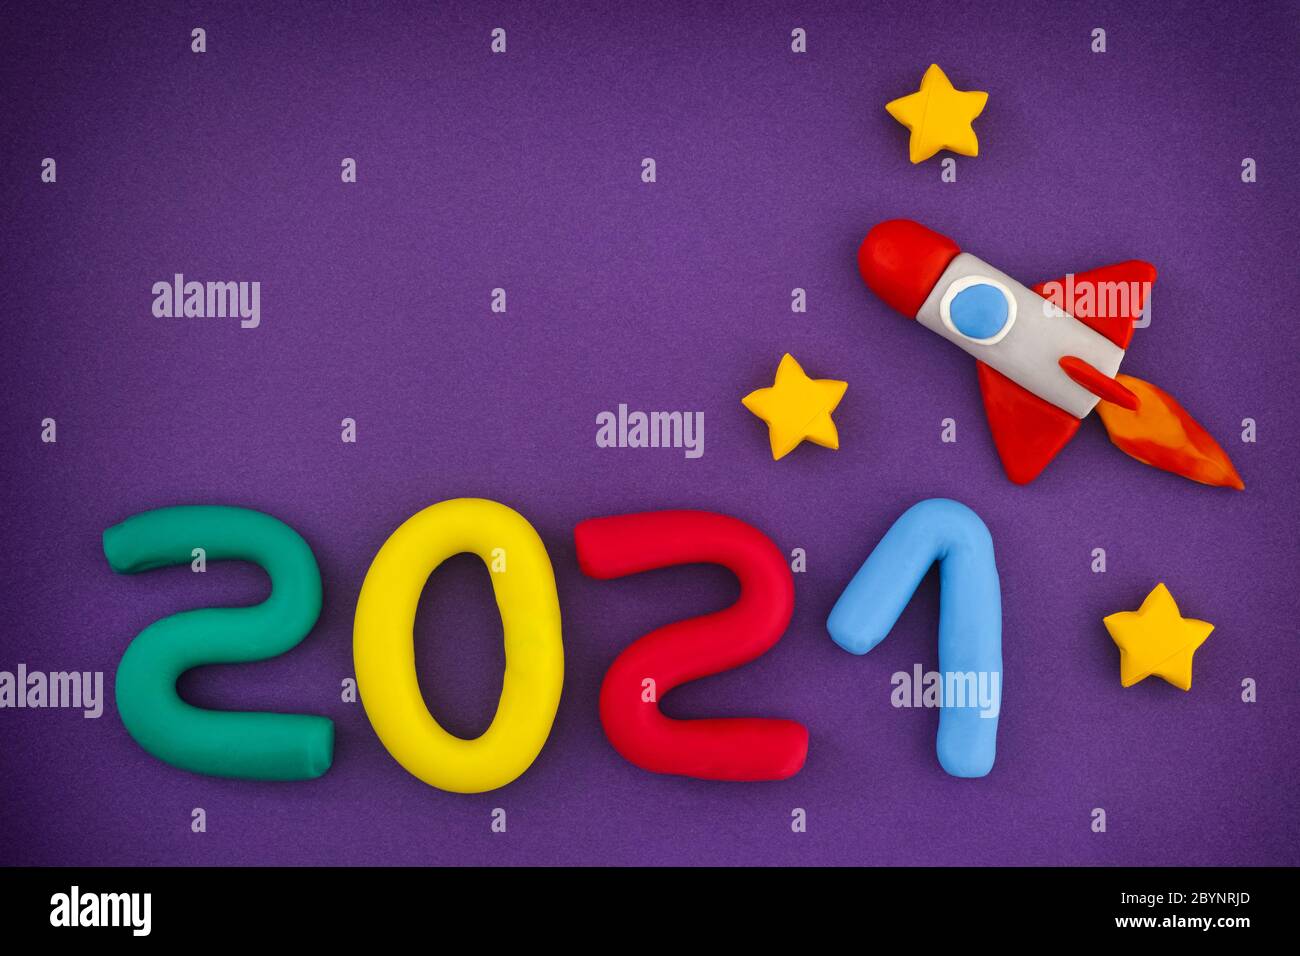 2021 New Year. Space rocket and Numbers are made out of play clay (plasticine). Stock Photo